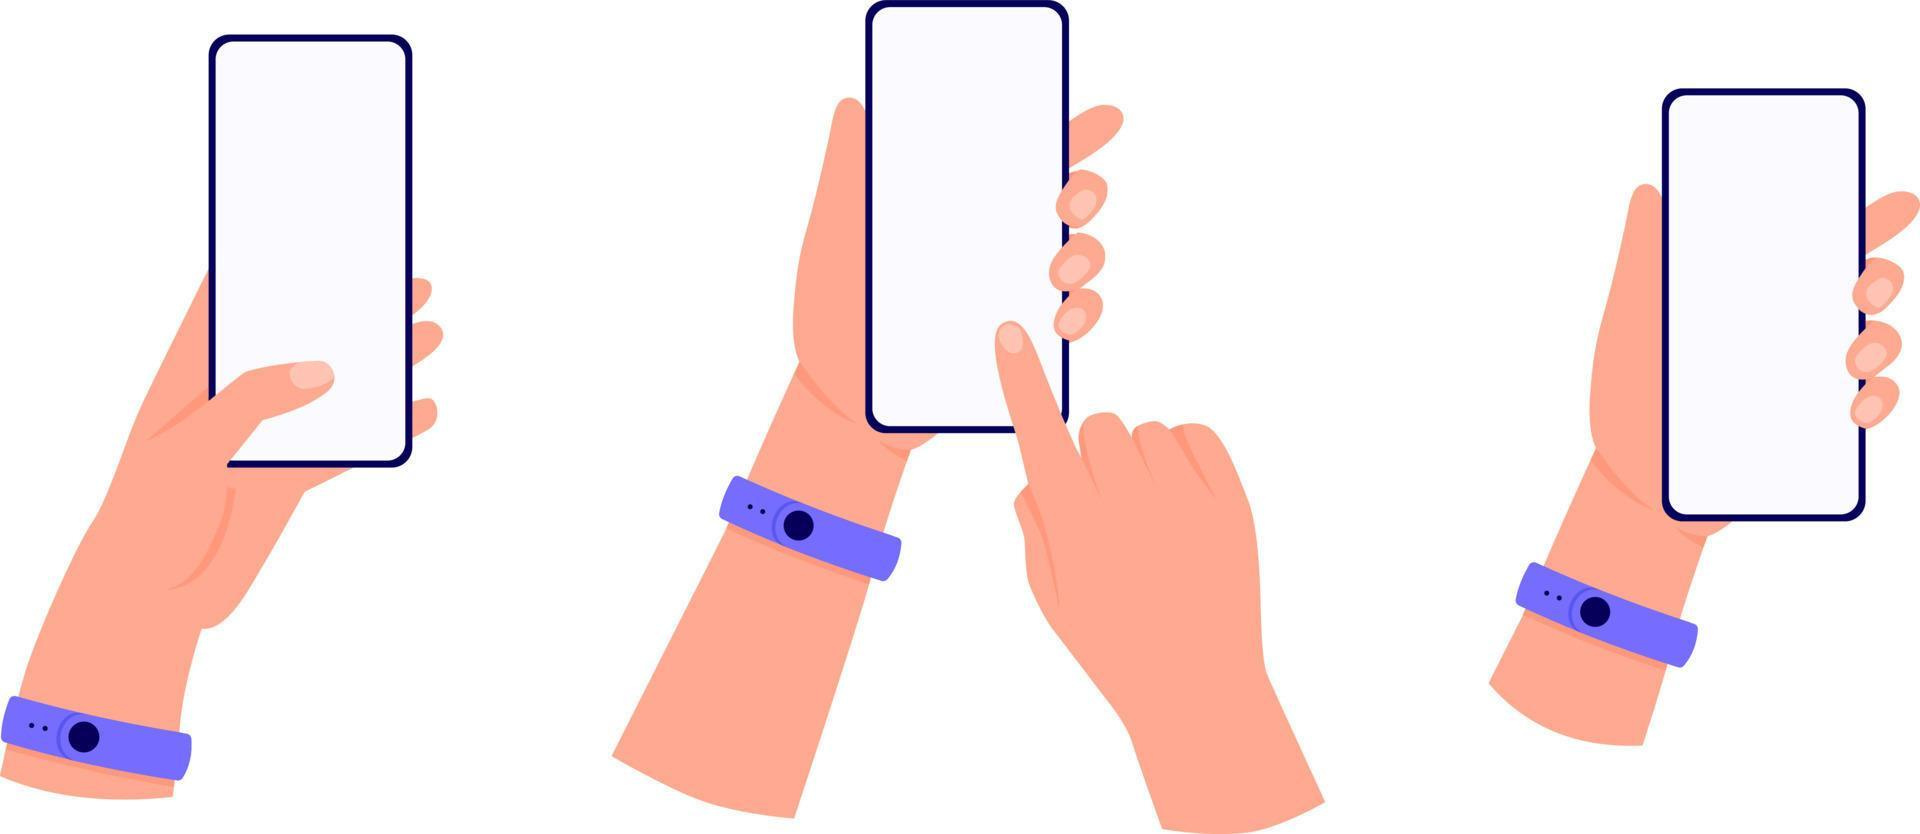 set-of-templates-with-hand-that-hold-a-mobile-phone-collection-of-hands-with-finger-on-smartphone-flat-cartoon-illustration-isolated-on-white-background-vector.jpg